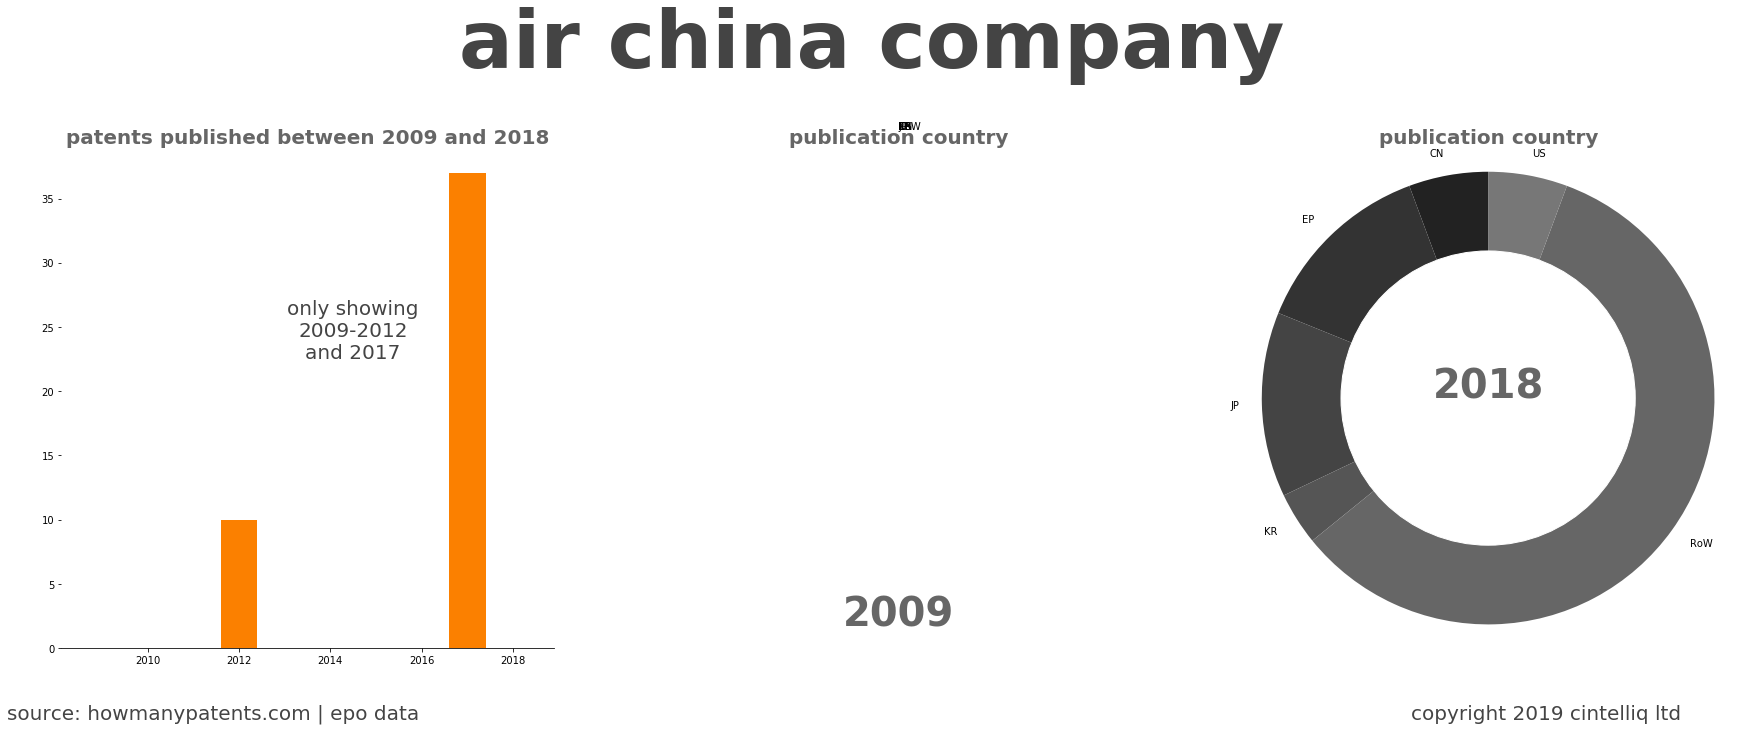 summary of patents for Air China Company